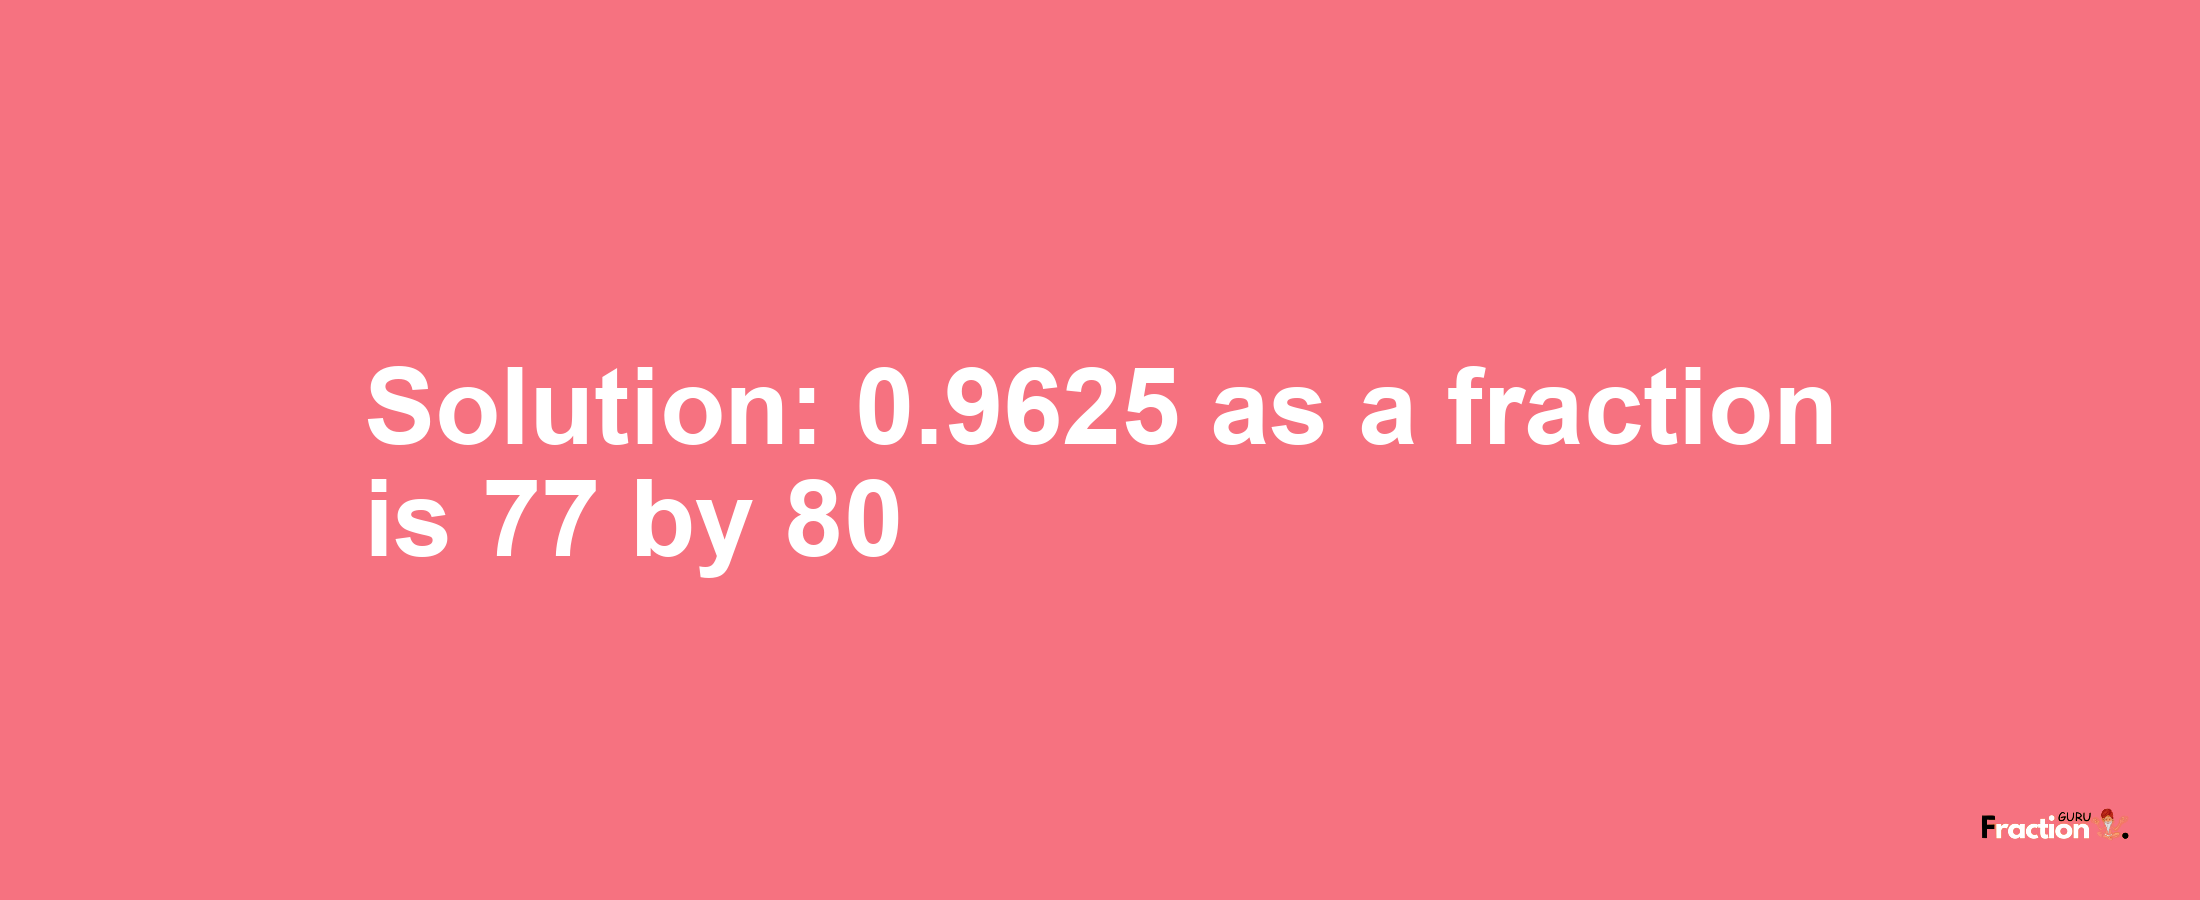 Solution:0.9625 as a fraction is 77/80